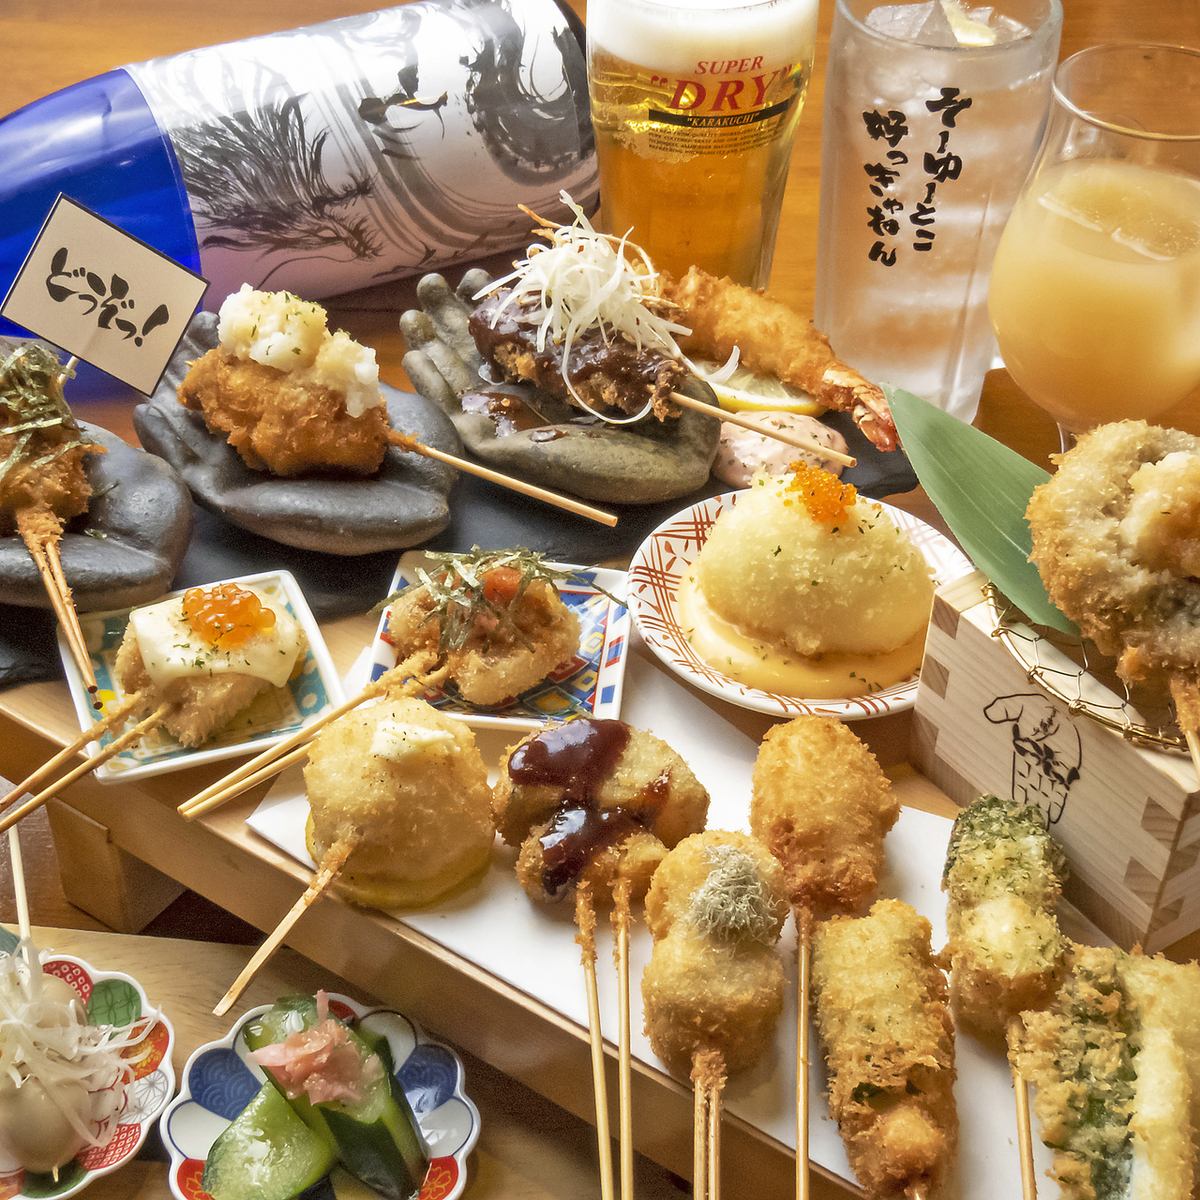 Limited to Saturdays and Sundays! Lunch only! Enjoy your favorite drink and Kyoto skewers♪